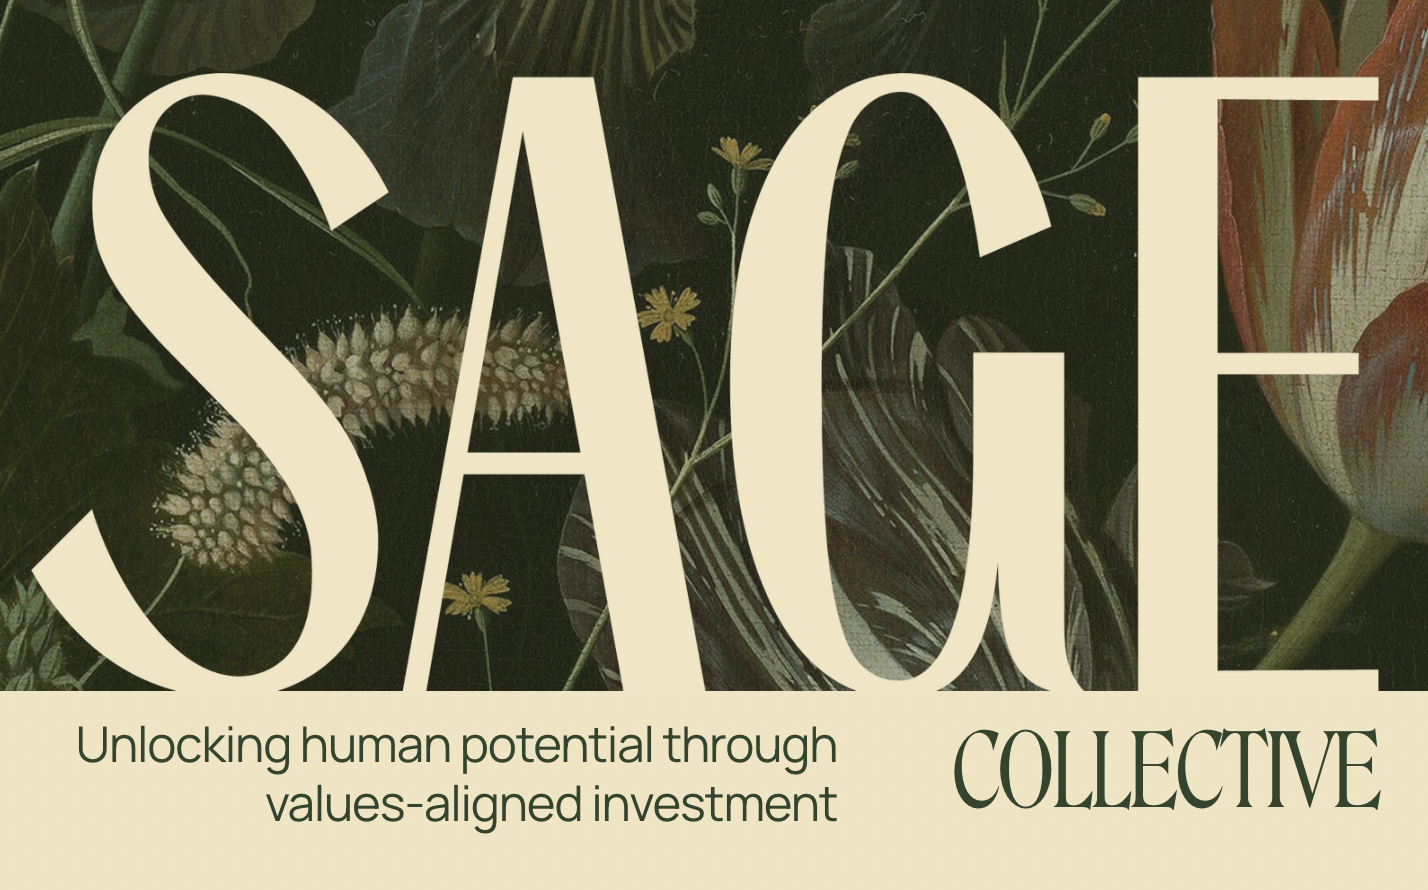 Sage Collective